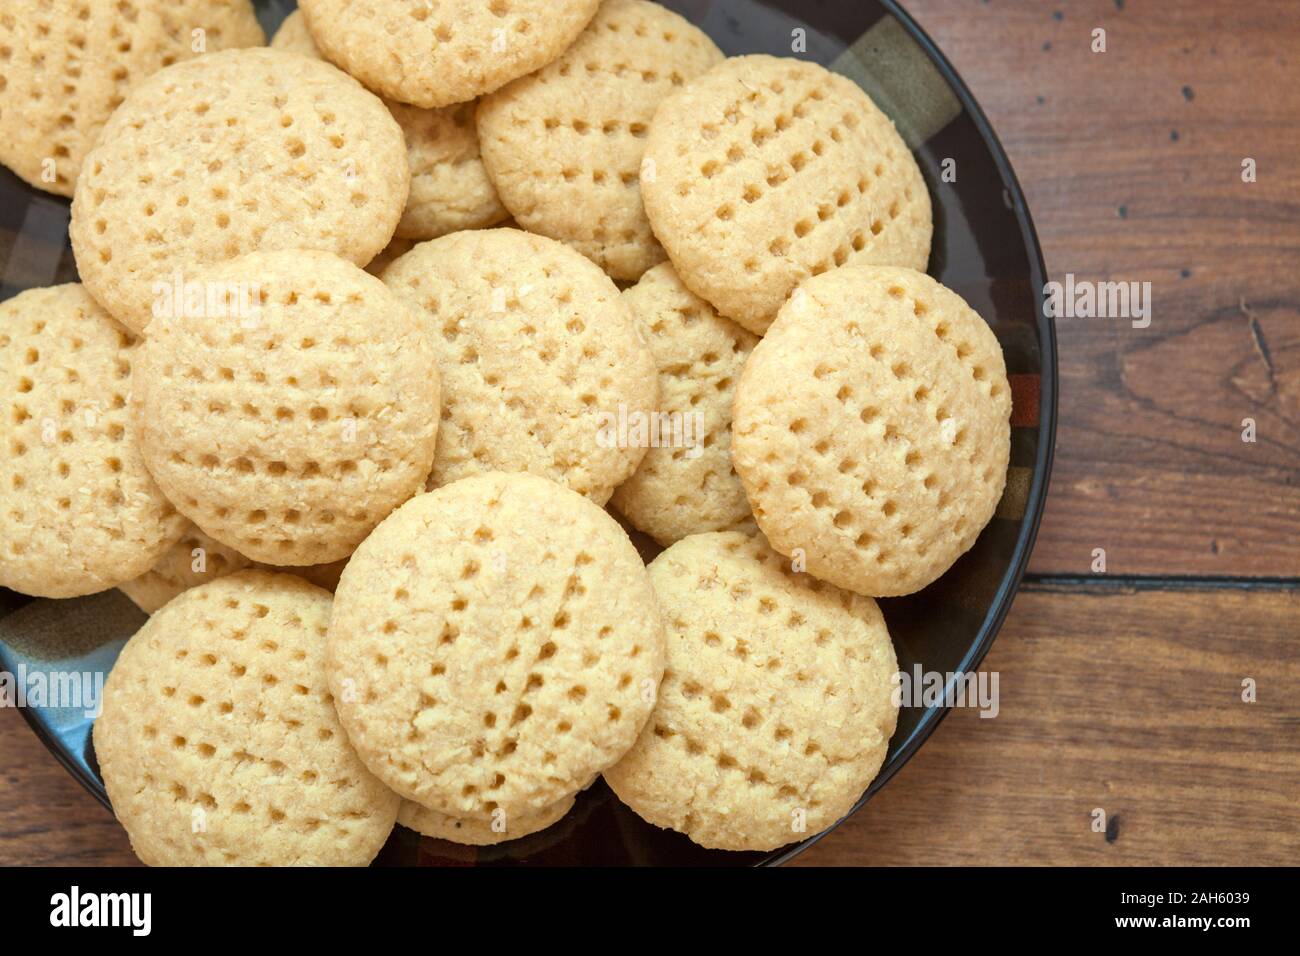 Coconut sweet biscuit on plate Stock Photo